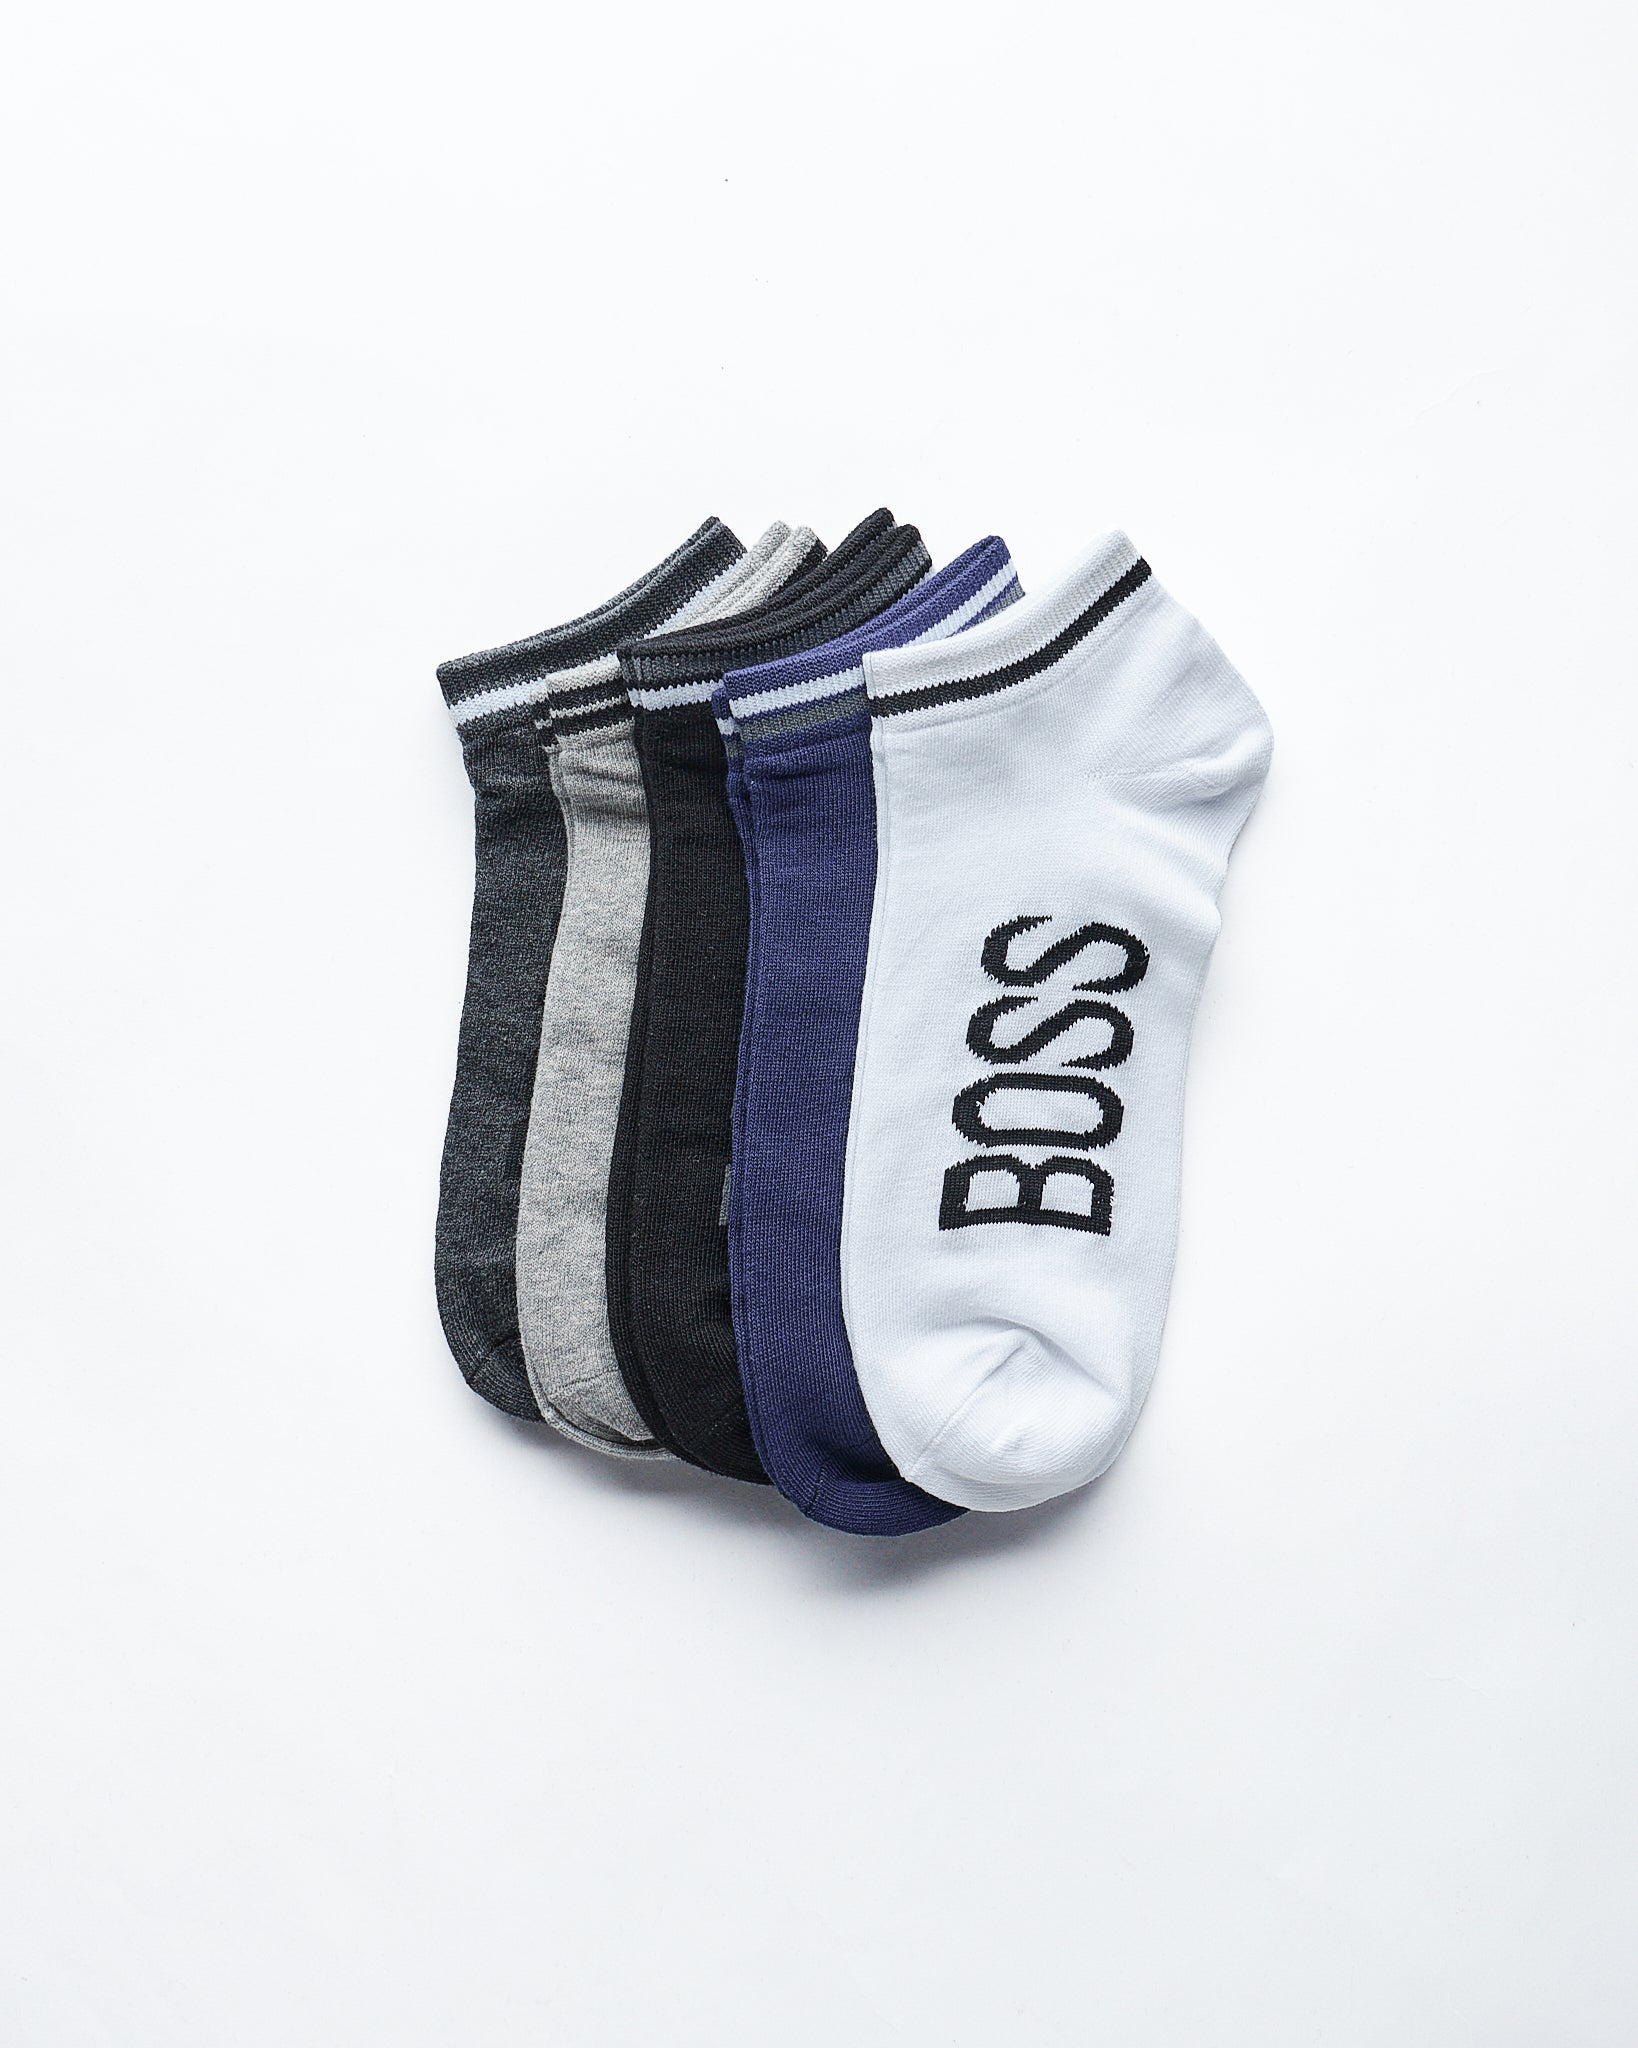 MOI OUTFIT-Boss 5 Pairs Low Cut Socks 14.50